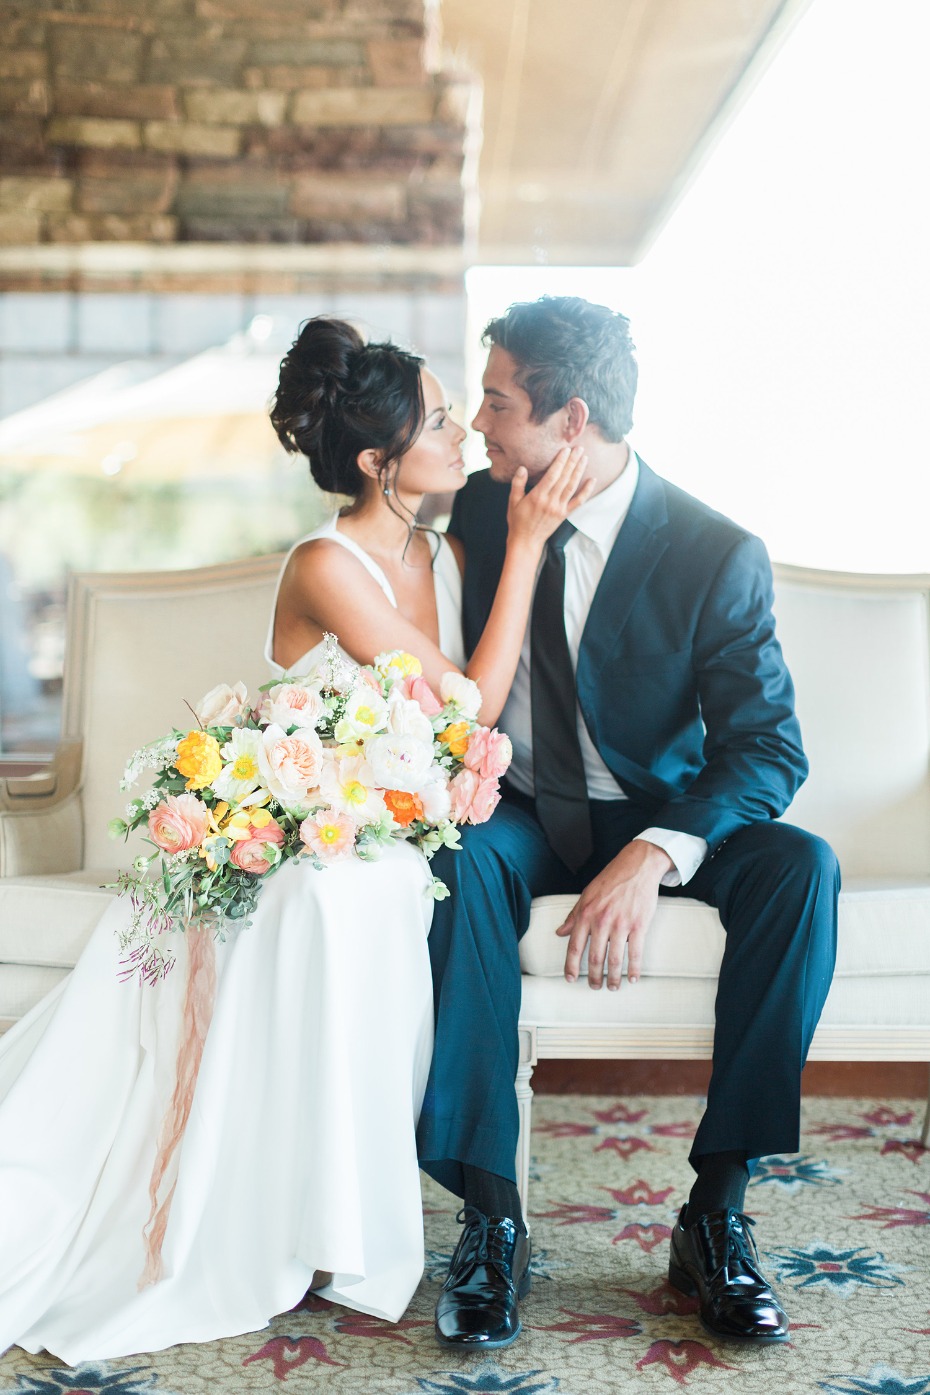 Gorgeous wedding inspiration for you